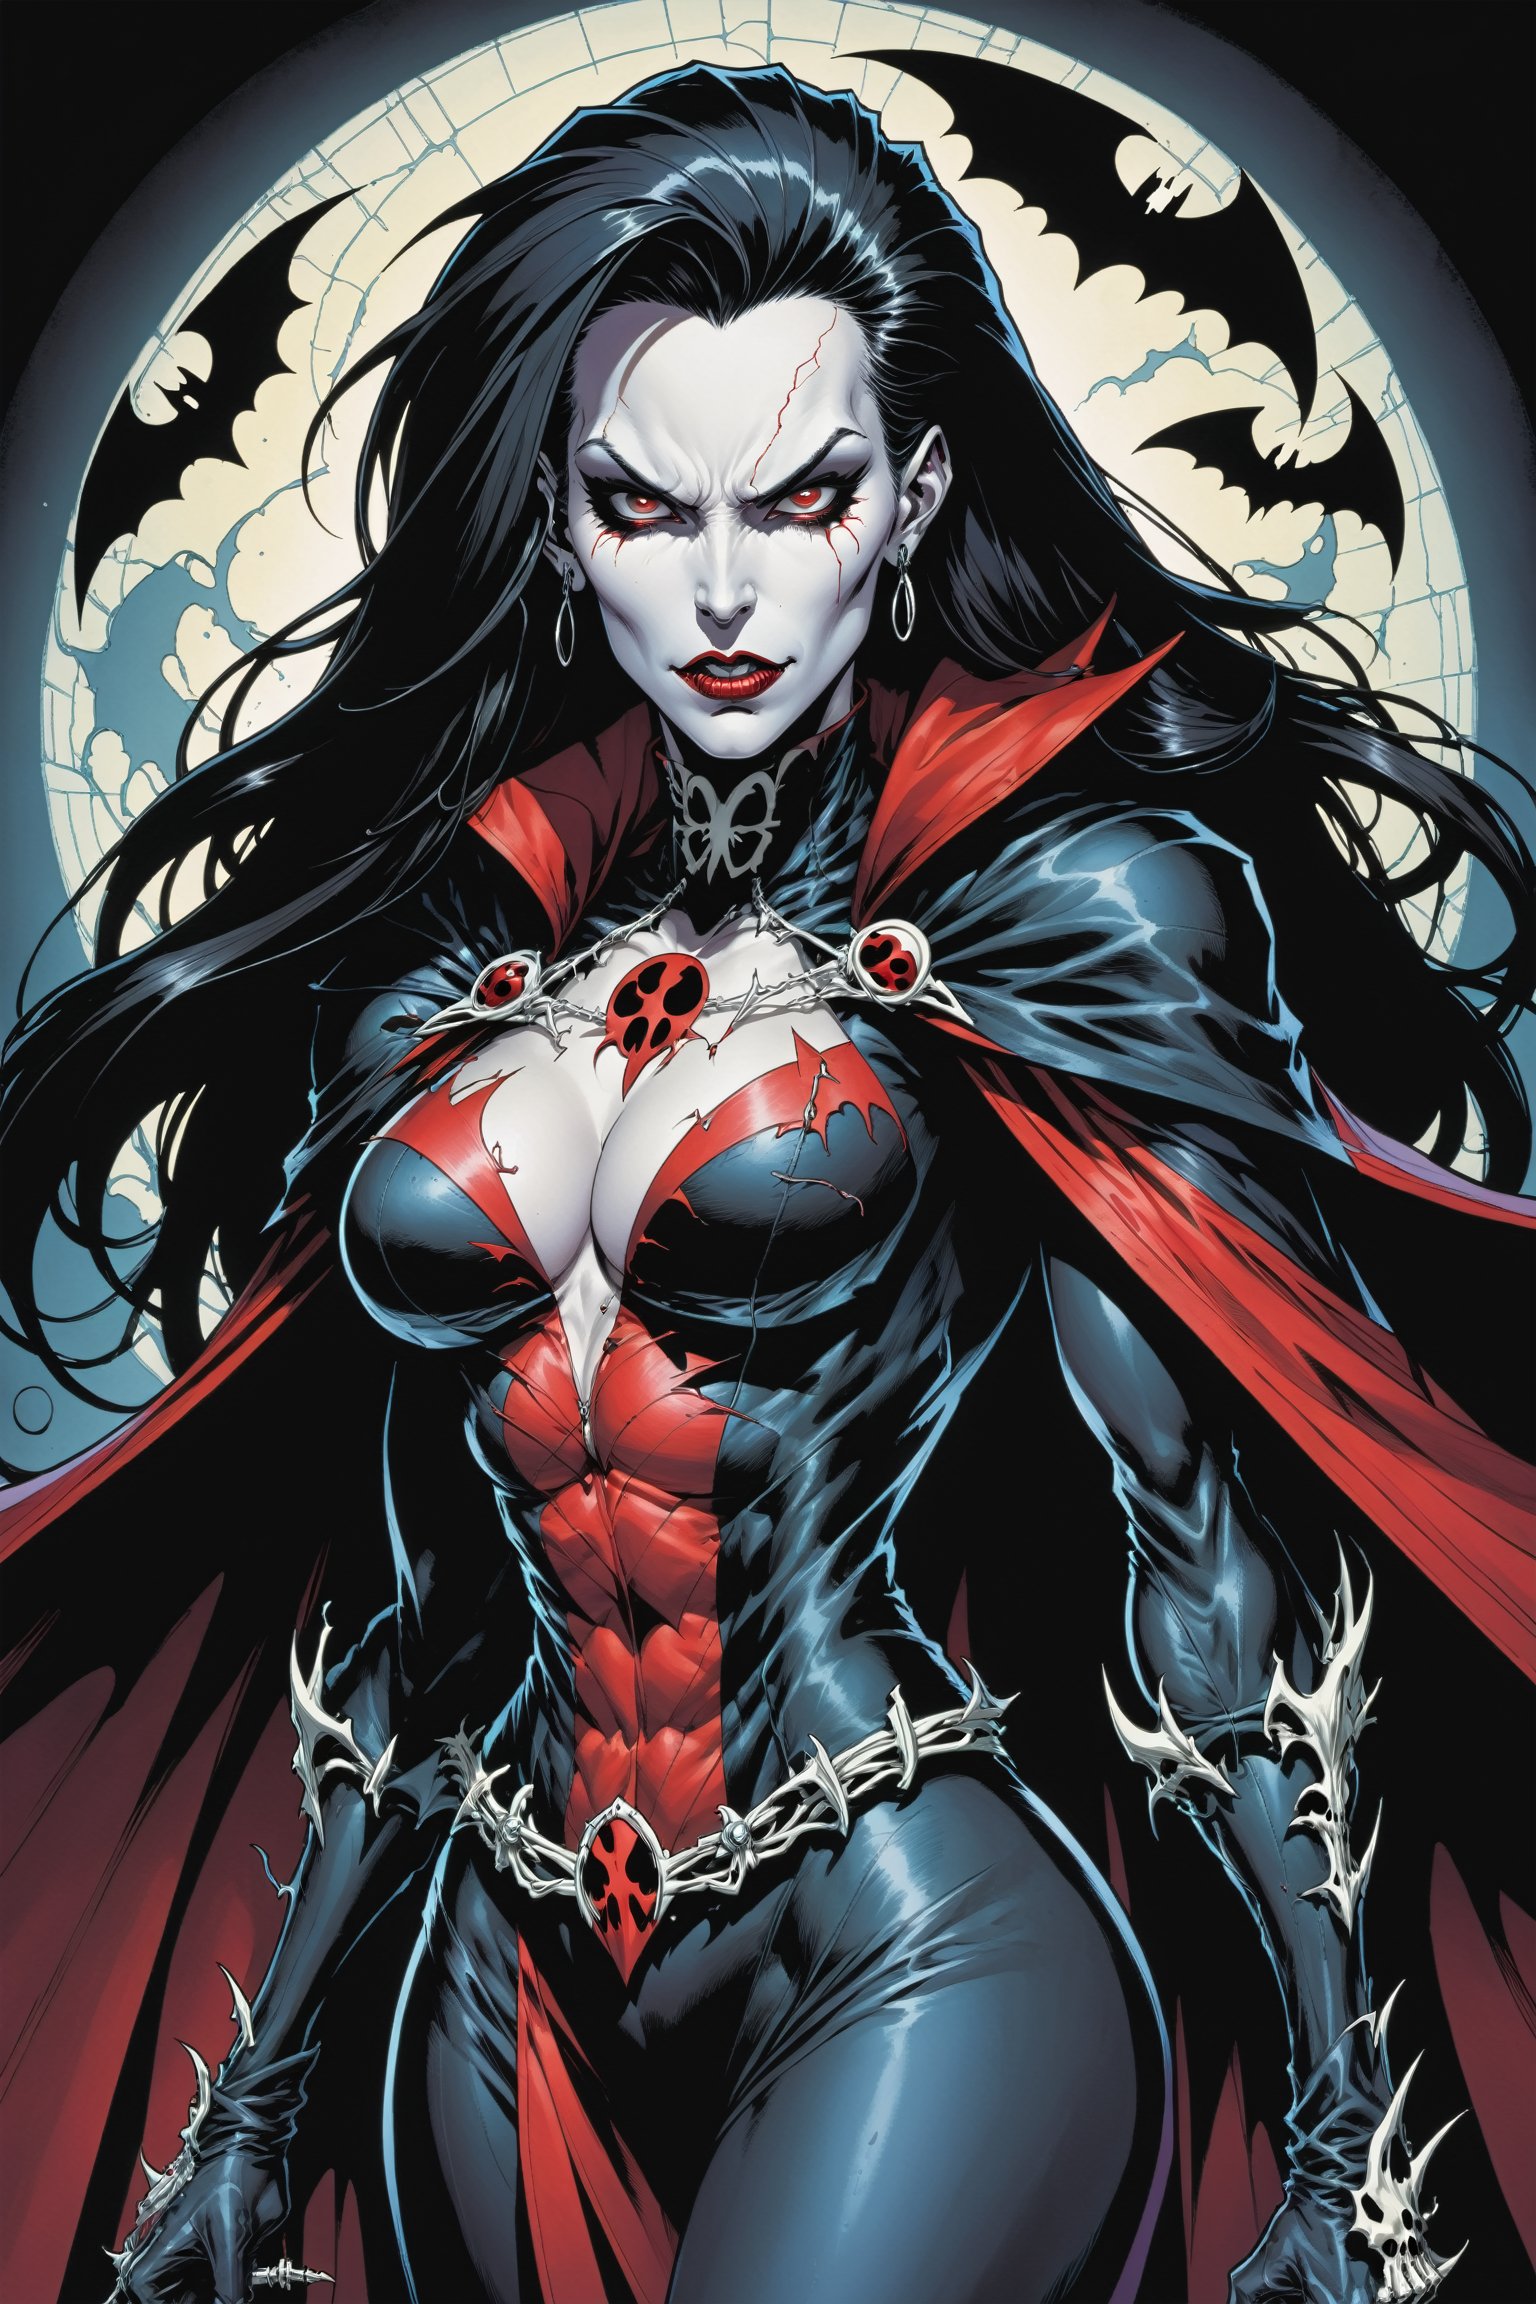 midshot, cel-shading style, centered image, ultra detailed illustration of the comic character ((female Spawn Dracula, by Todd McFarlane)), posing, she has long black hair, black suit with a skull emblem, long flowing cape, ((Half Body)), (tetradic colors), inkpunk, ink lines, strong outlines, art by MSchiffer, bold traces, unframed, high contrast, cel-shaded, vector, 4k resolution, best quality, (chromatic aberration:1.8)